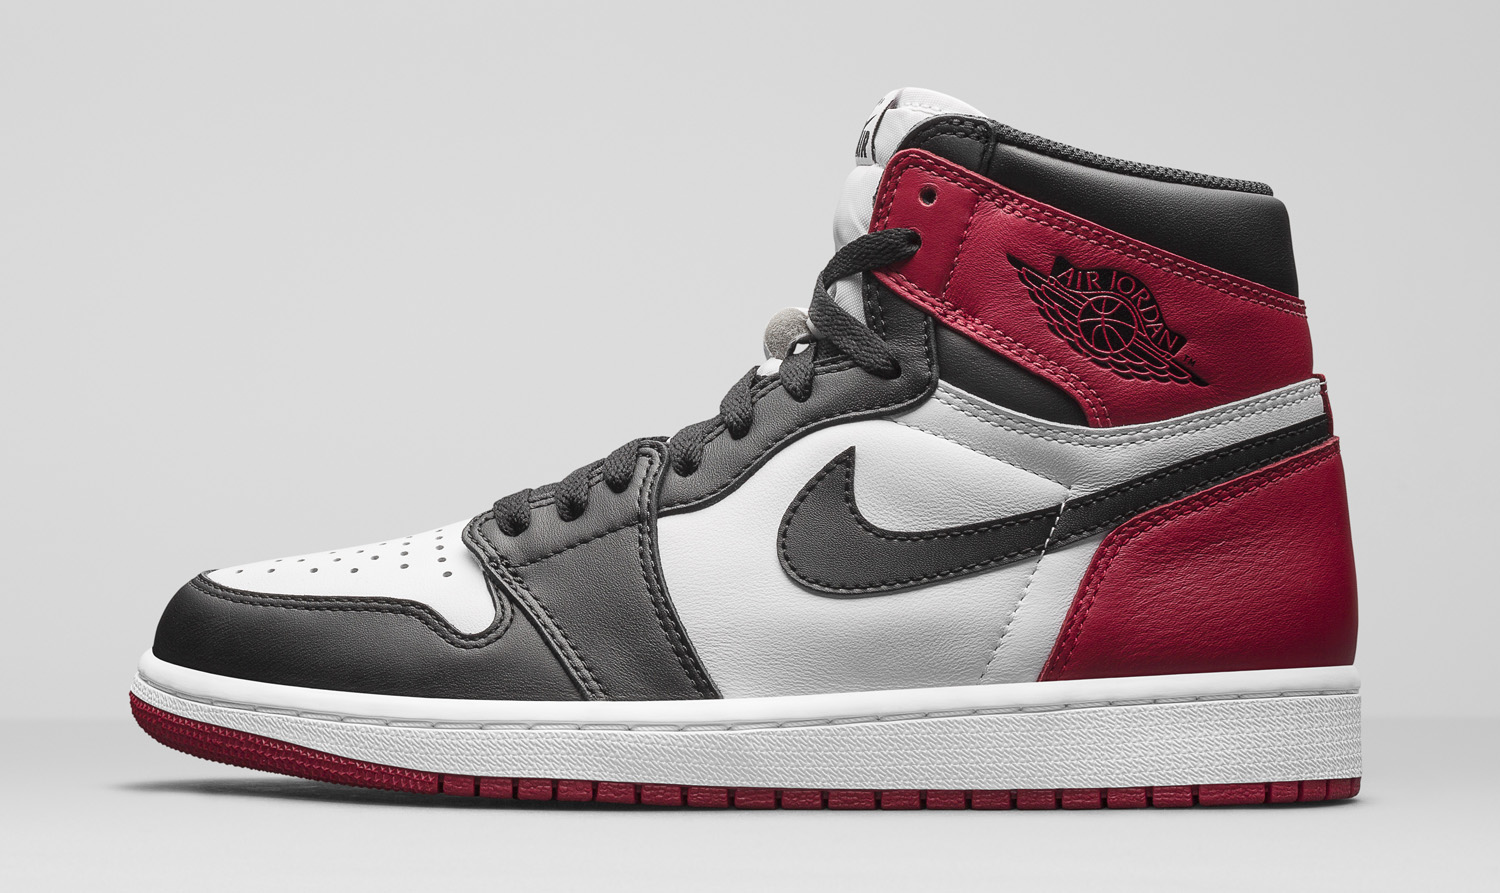 The Air Jordan 1 'Black Toe' Gets an Official Release Date - WearTesters